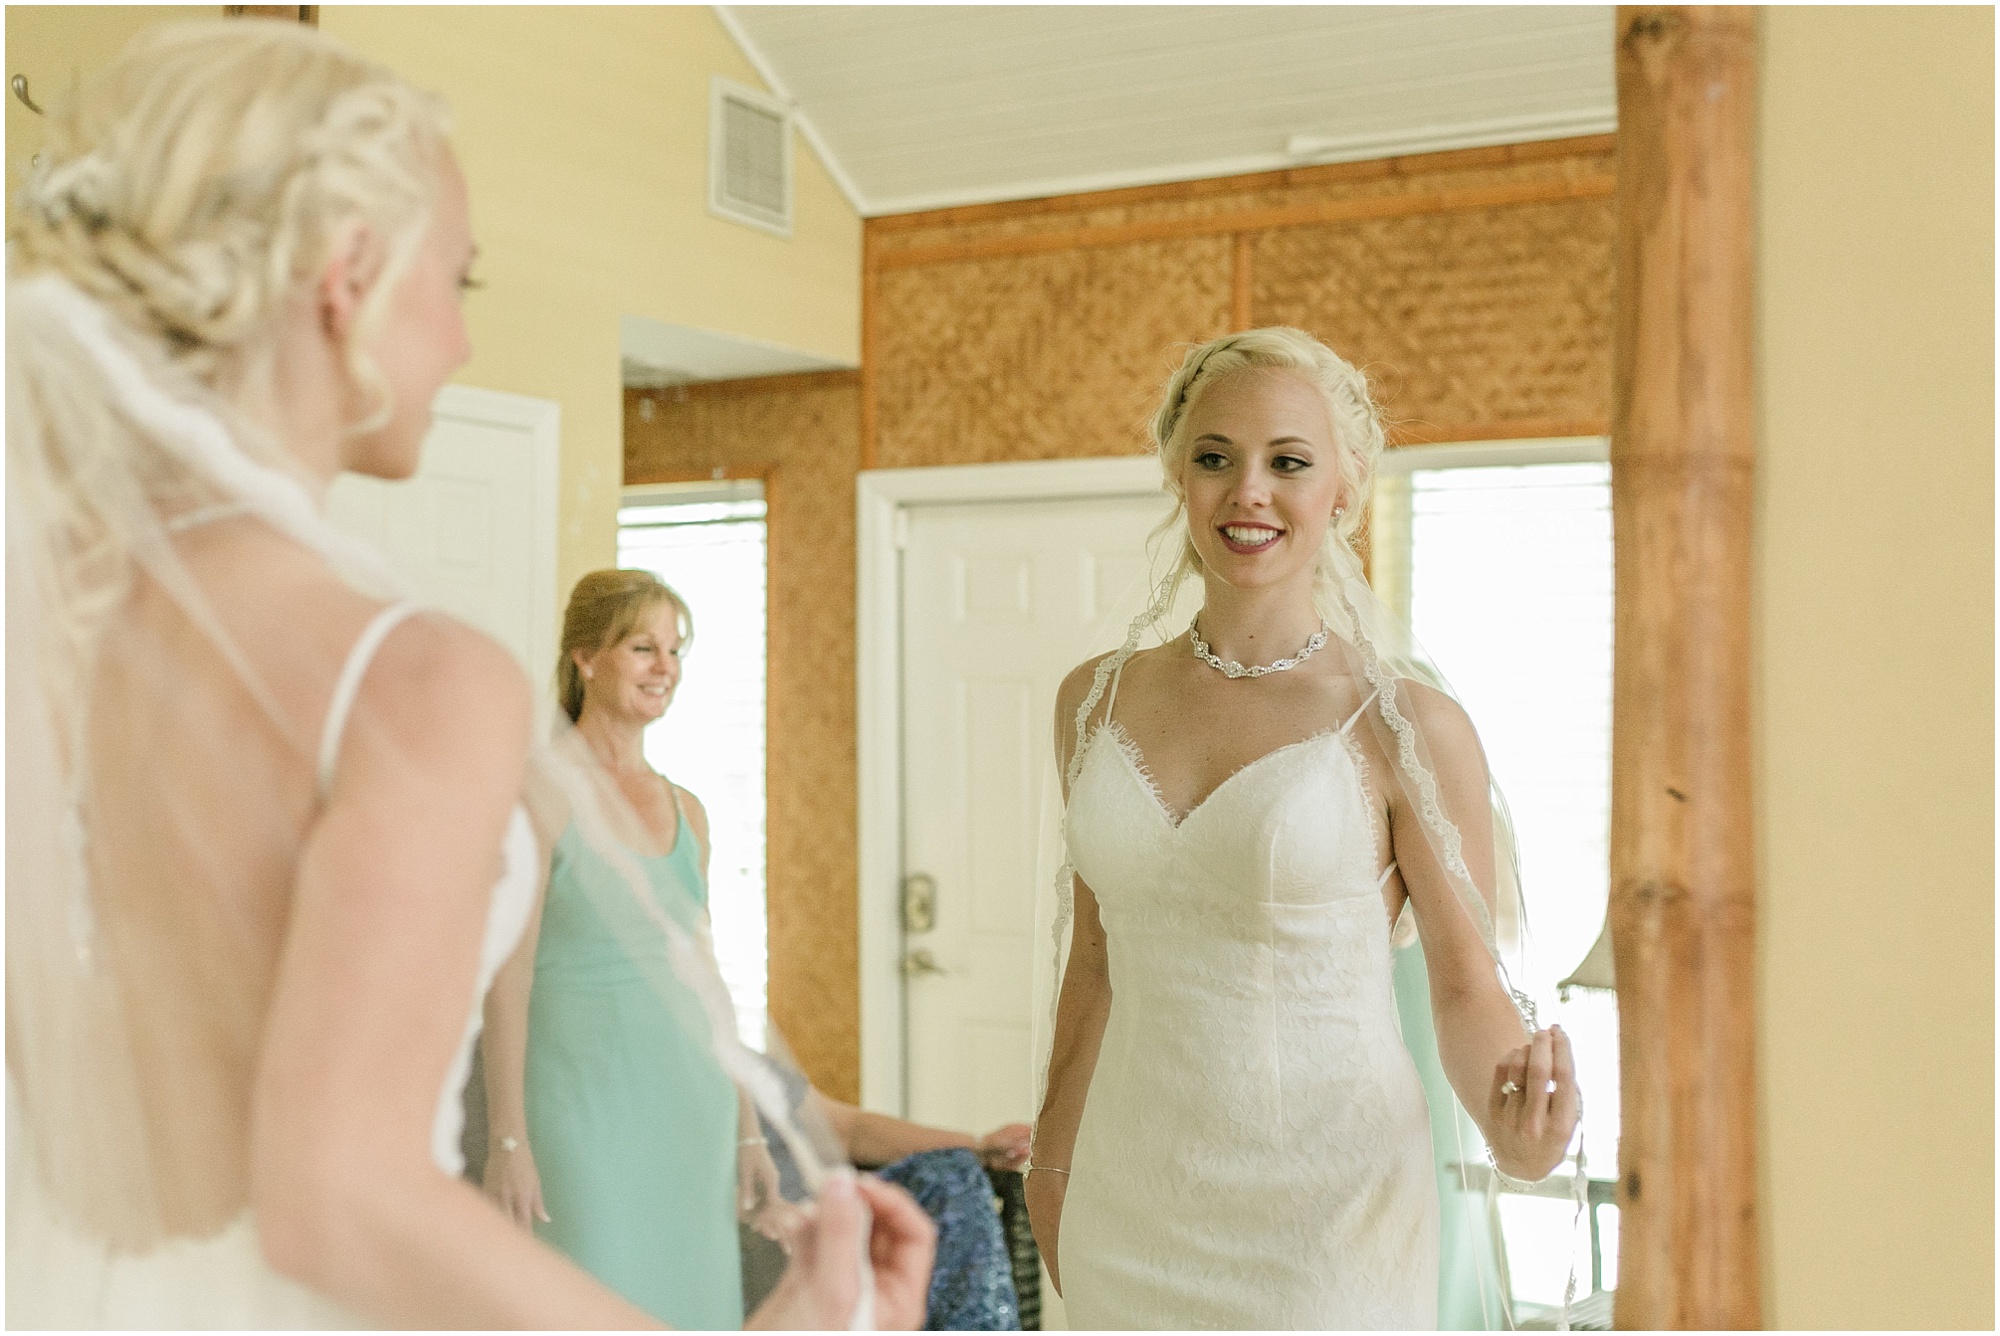 Bride looks at herself in the mirror before getting married.